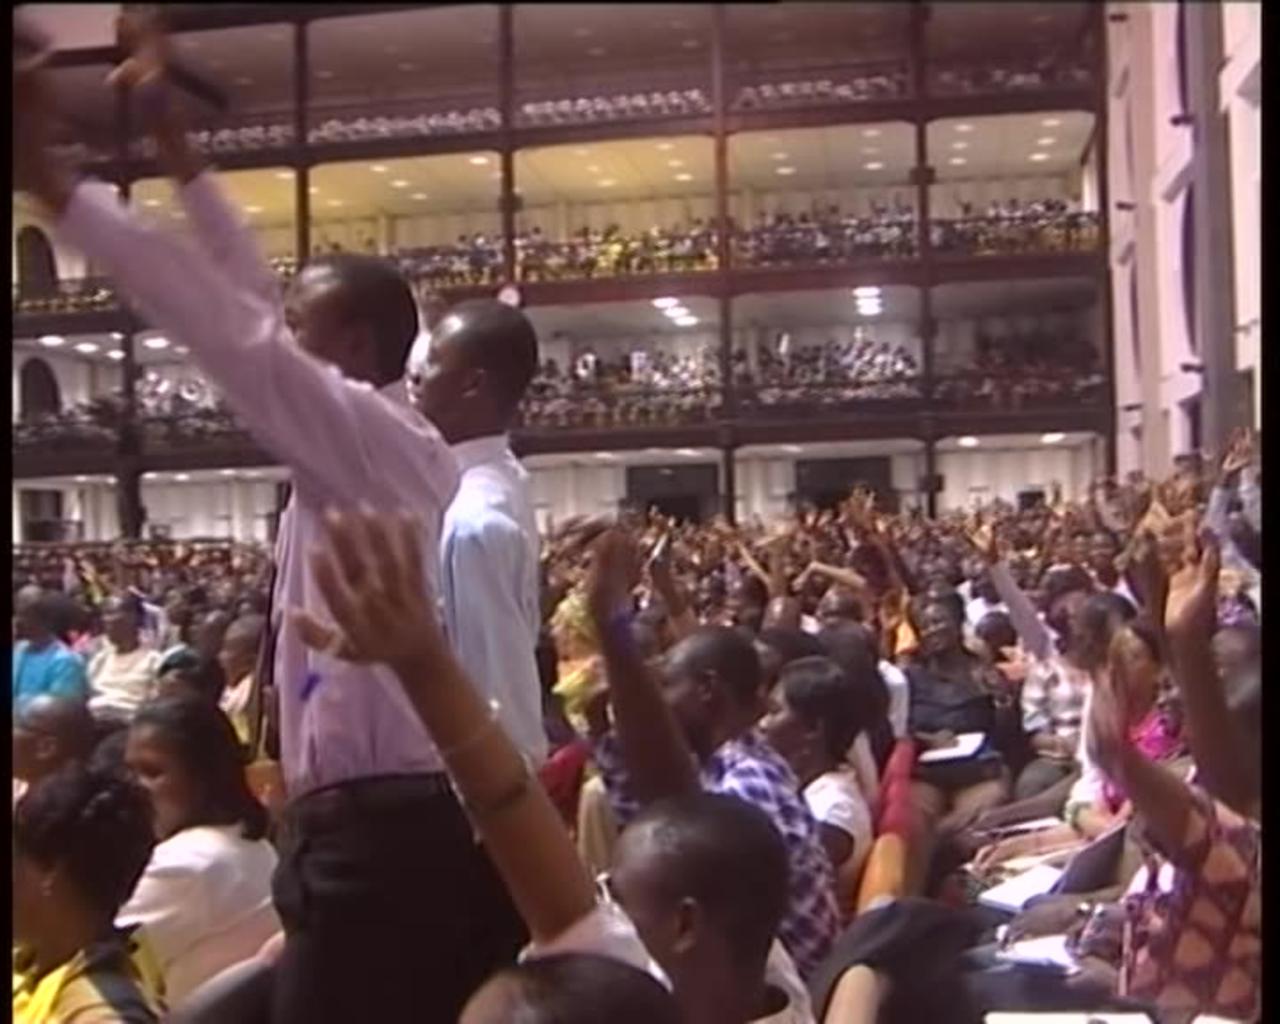 BUILDING THE CHURCH | CONVENTIONS | DAG HEWARD-MILLS